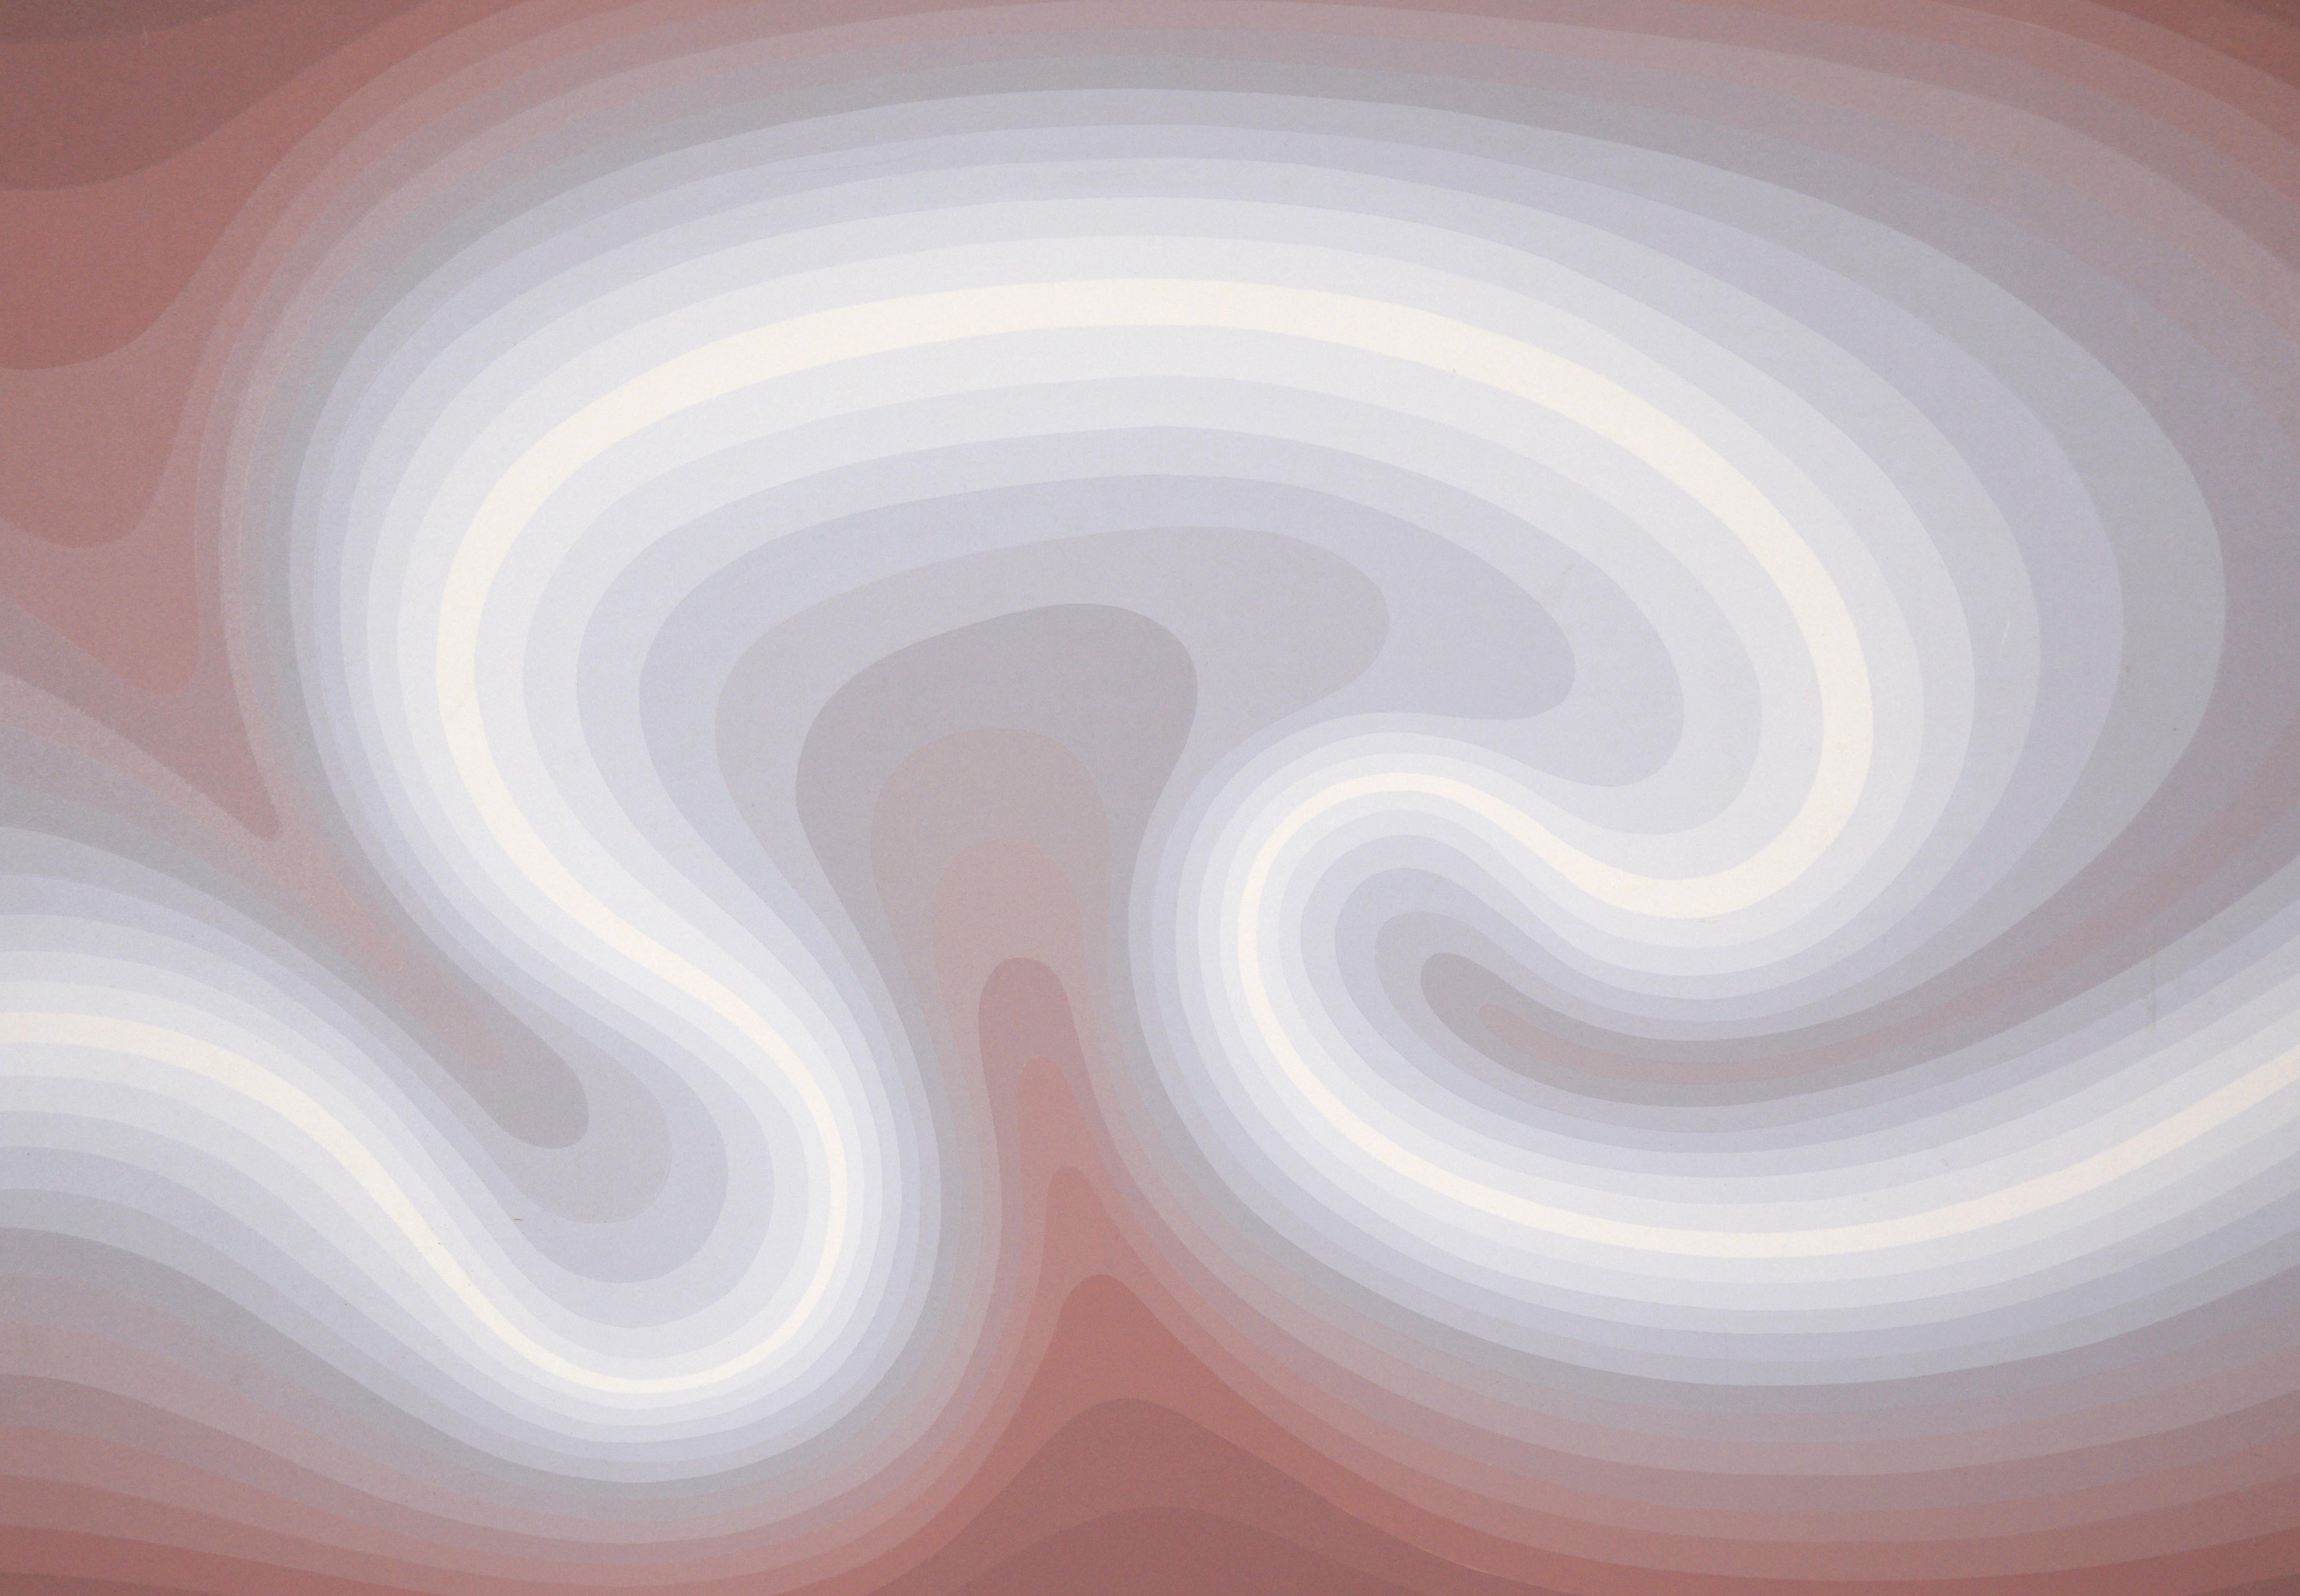 Beautiful multi color serigraph by Roy Ahlgren (American, 1927-2011). This piece transitions from a dark magenta to a silvery blue, passing through warm grey shades in between. The shape is a swirl that has doubled back on itself, appearing